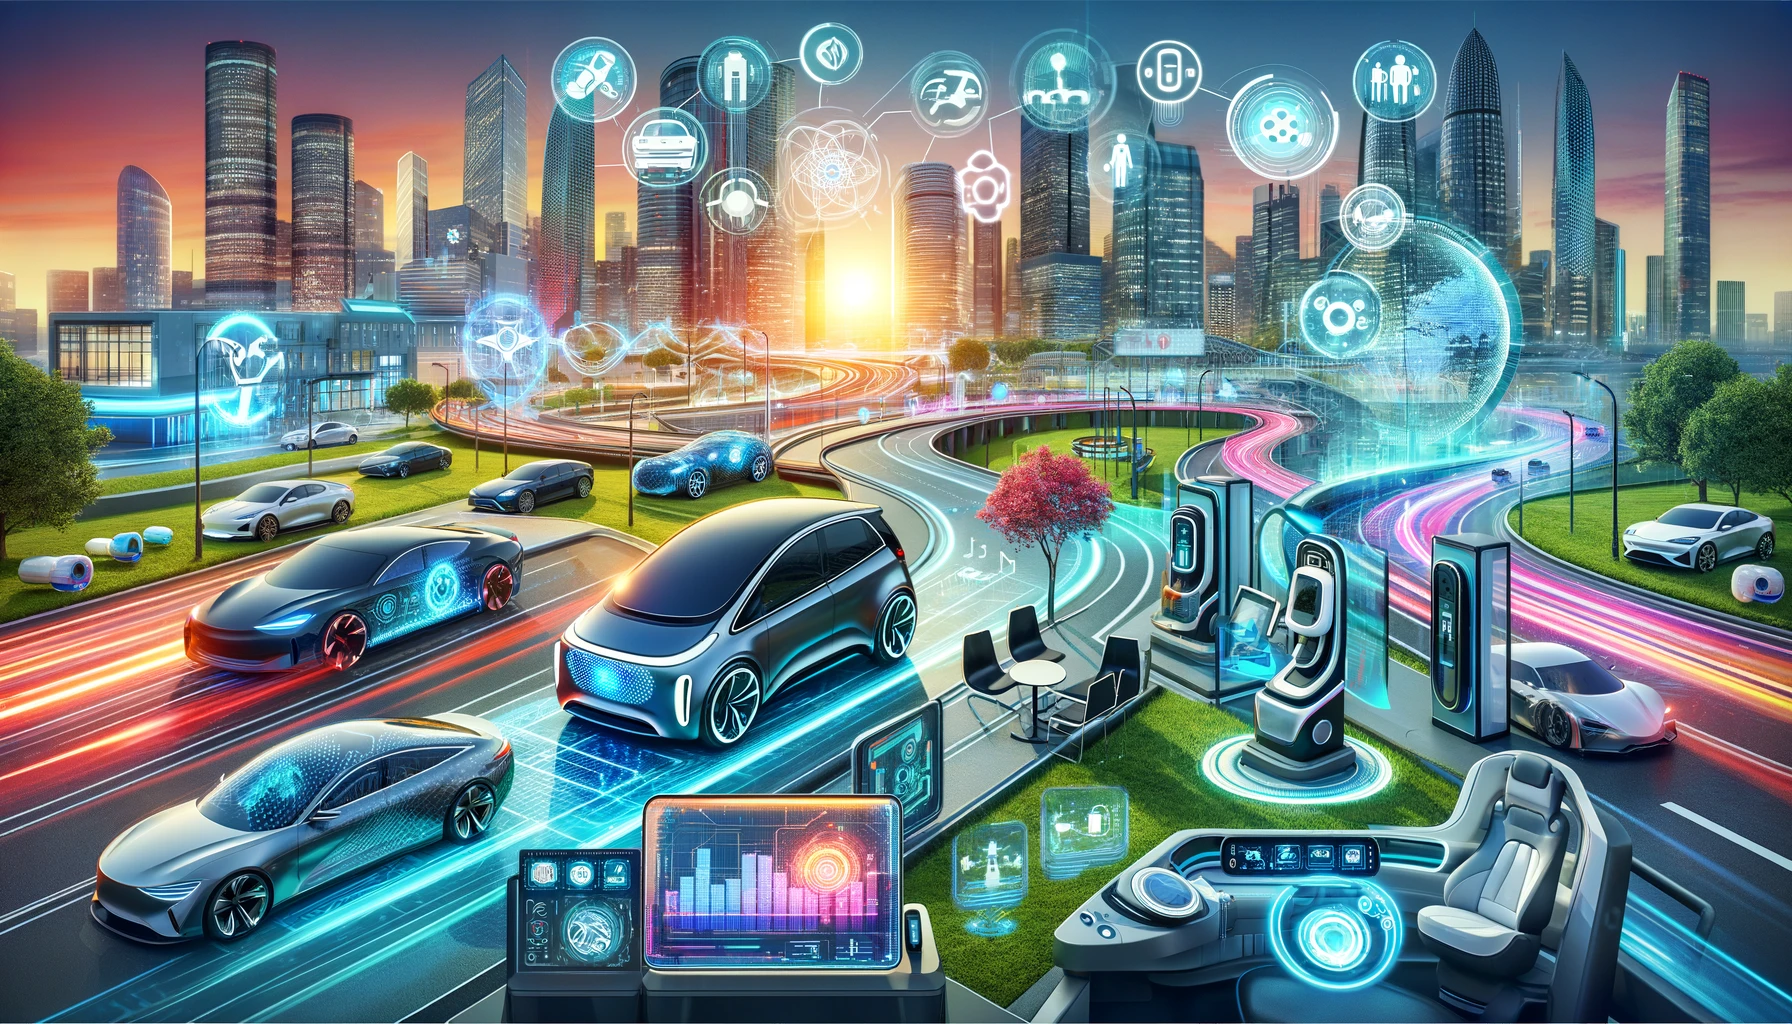 Consumer Trends for the Automotive Industry: Key Insights and Future Directions